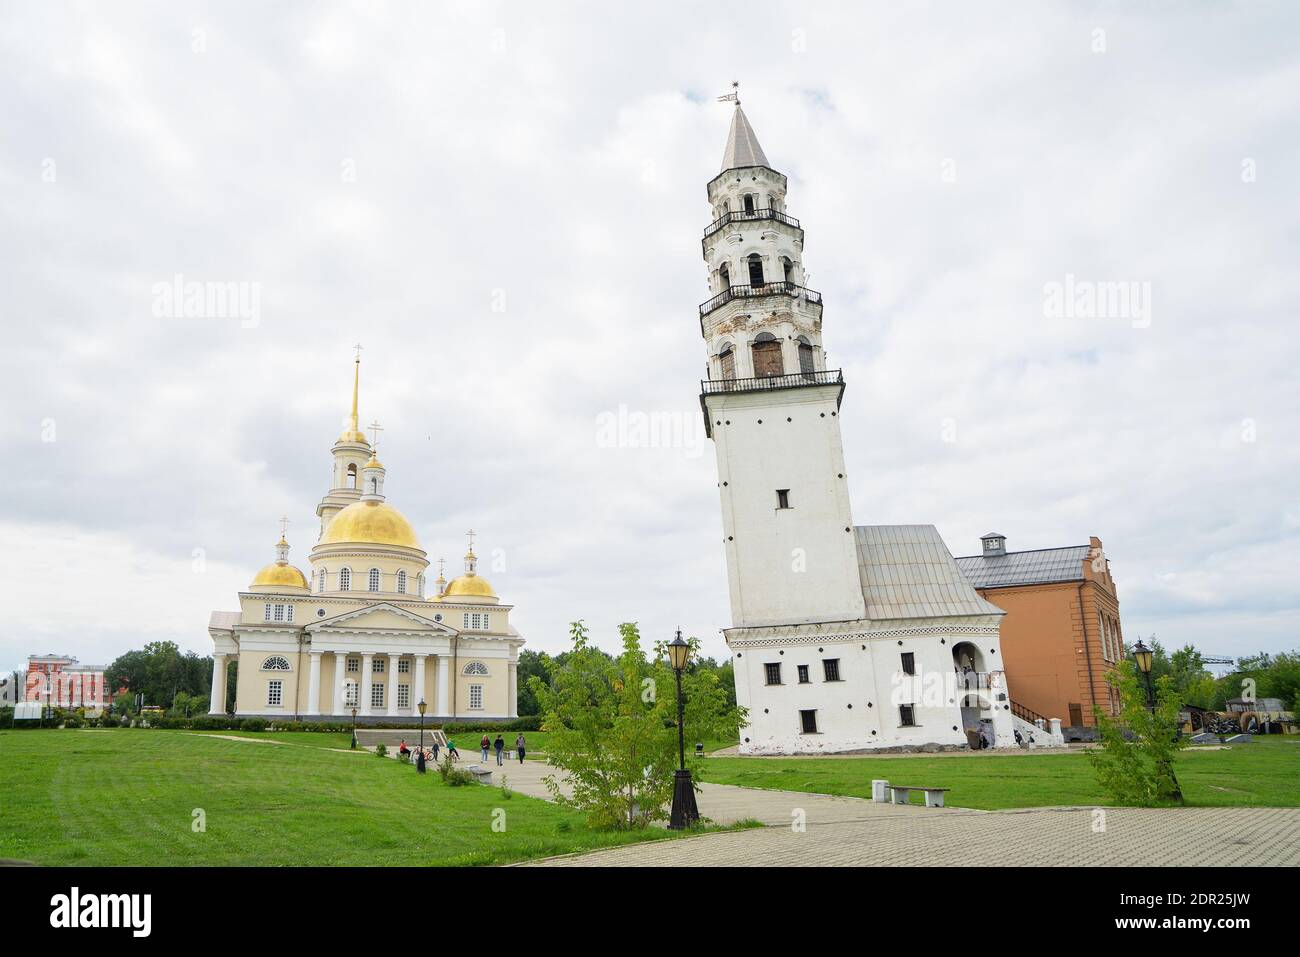 Leaning Tower of Nevyansk and Old Believers' church (domed) in summer day. Tower in the town of Nevyansk in Sverdlovsk Oblast, Russia Stock Photo